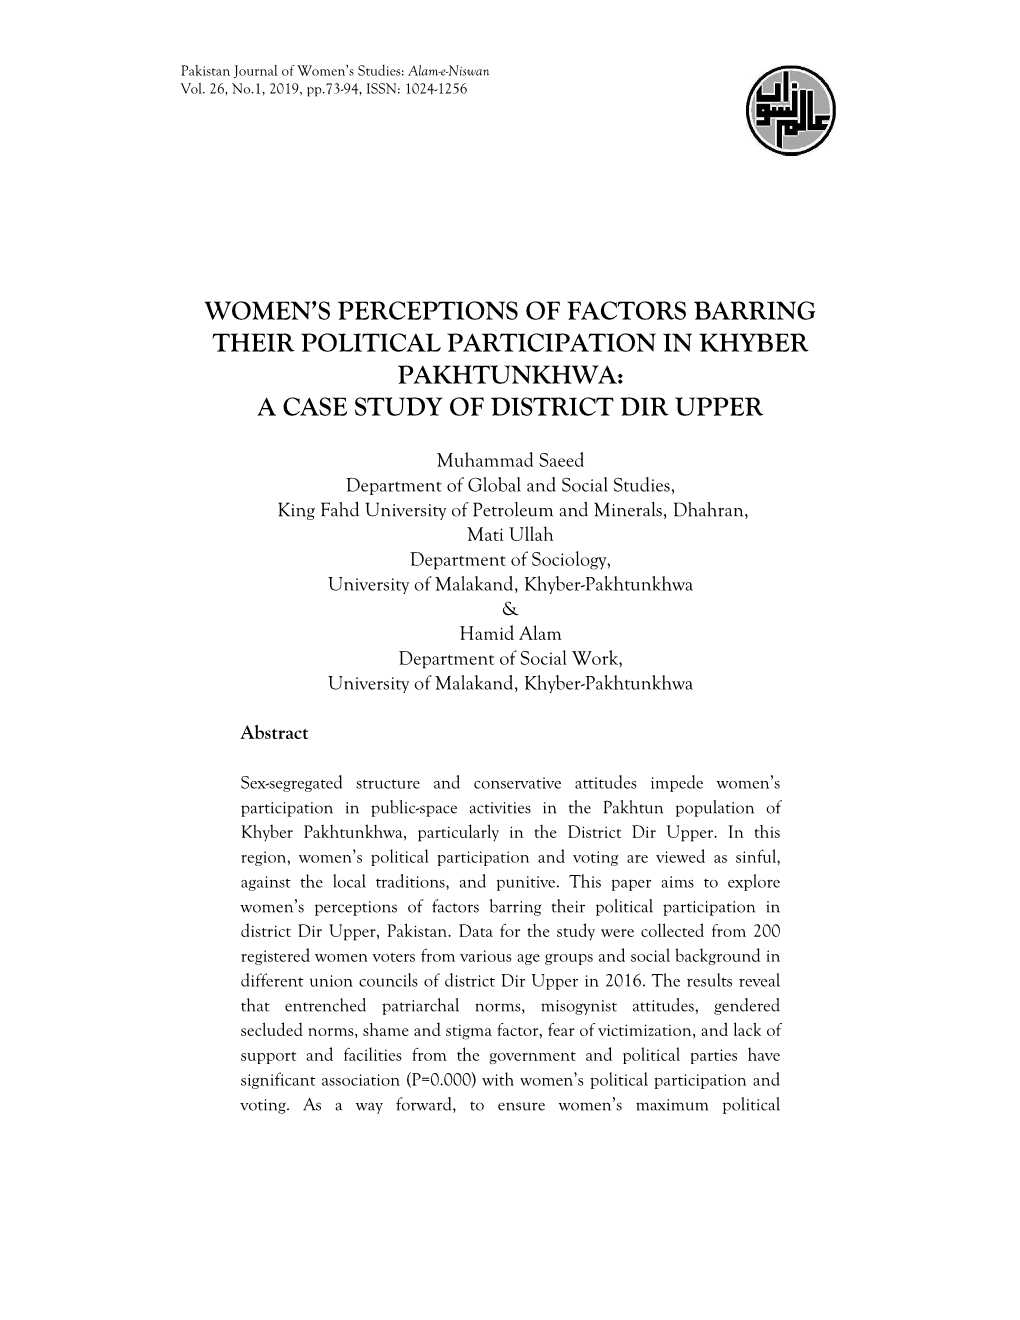 Women's Perceptions of Factors Barring Their Political Participation In